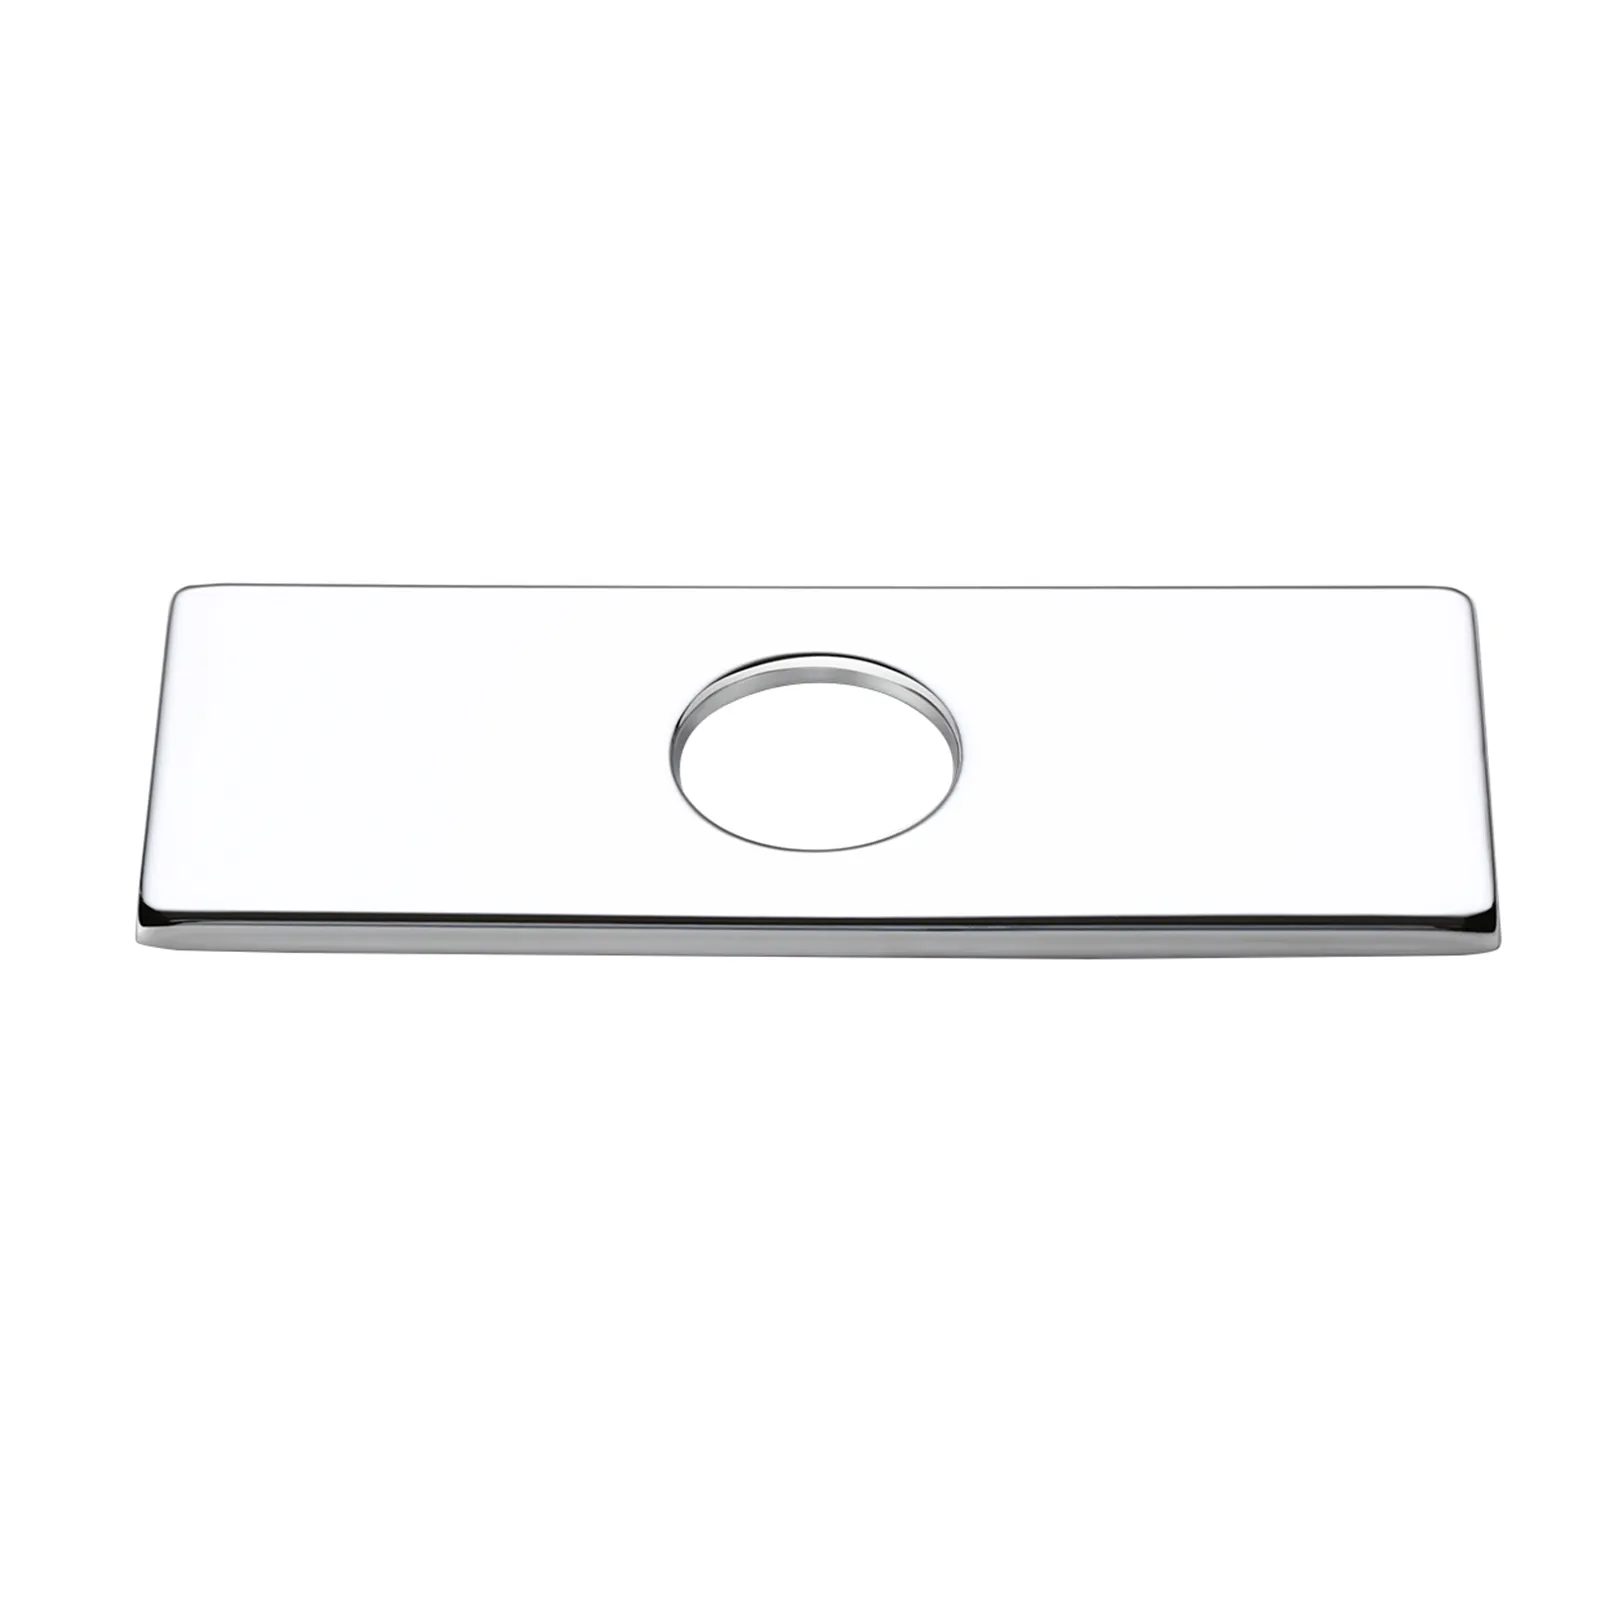 Square Escutcheon Plate Bathroom Vanity Sink Faucet Hole Cover Deck Plate Polished Chrome